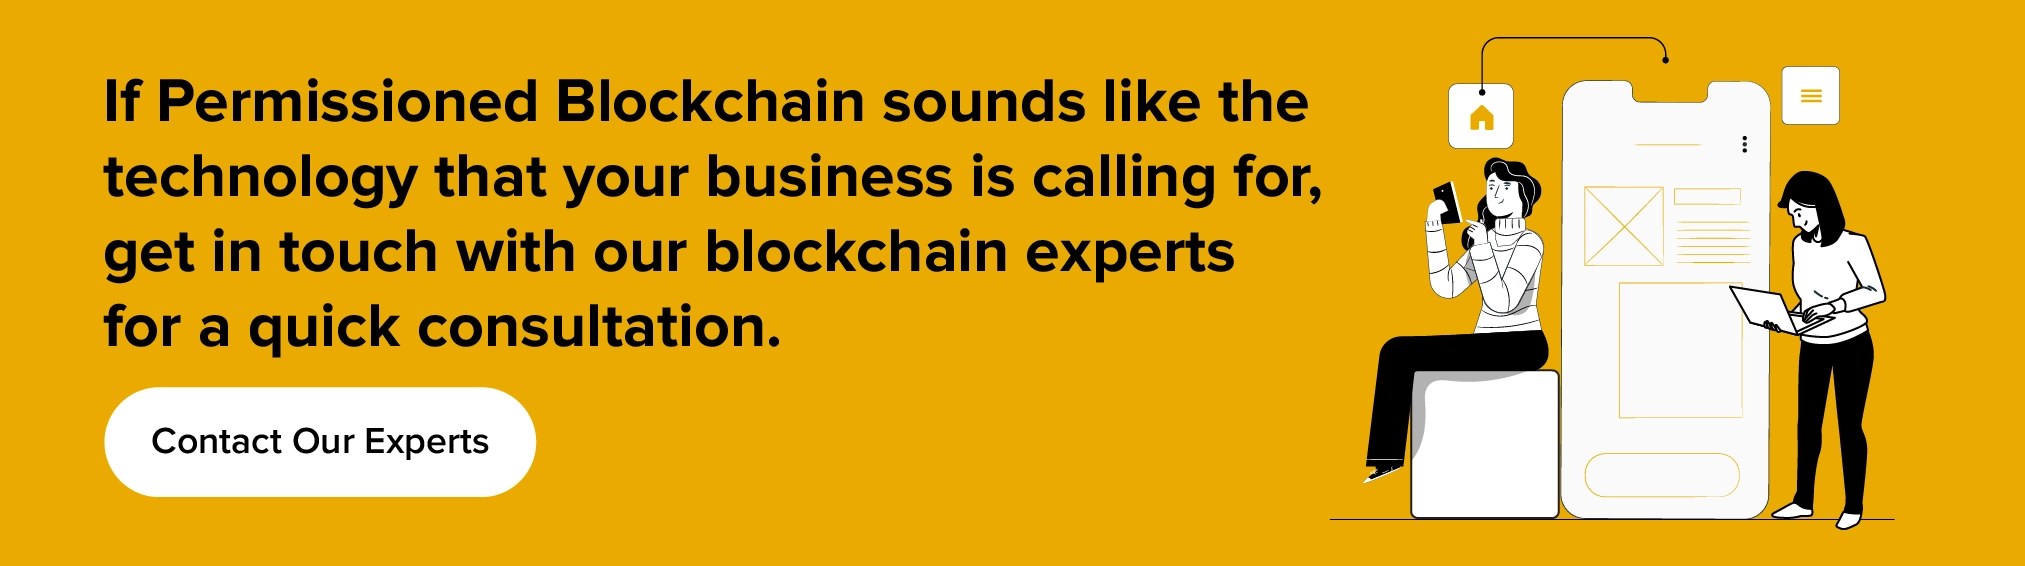 Get in touch with our blockchain experts for a quick consultation